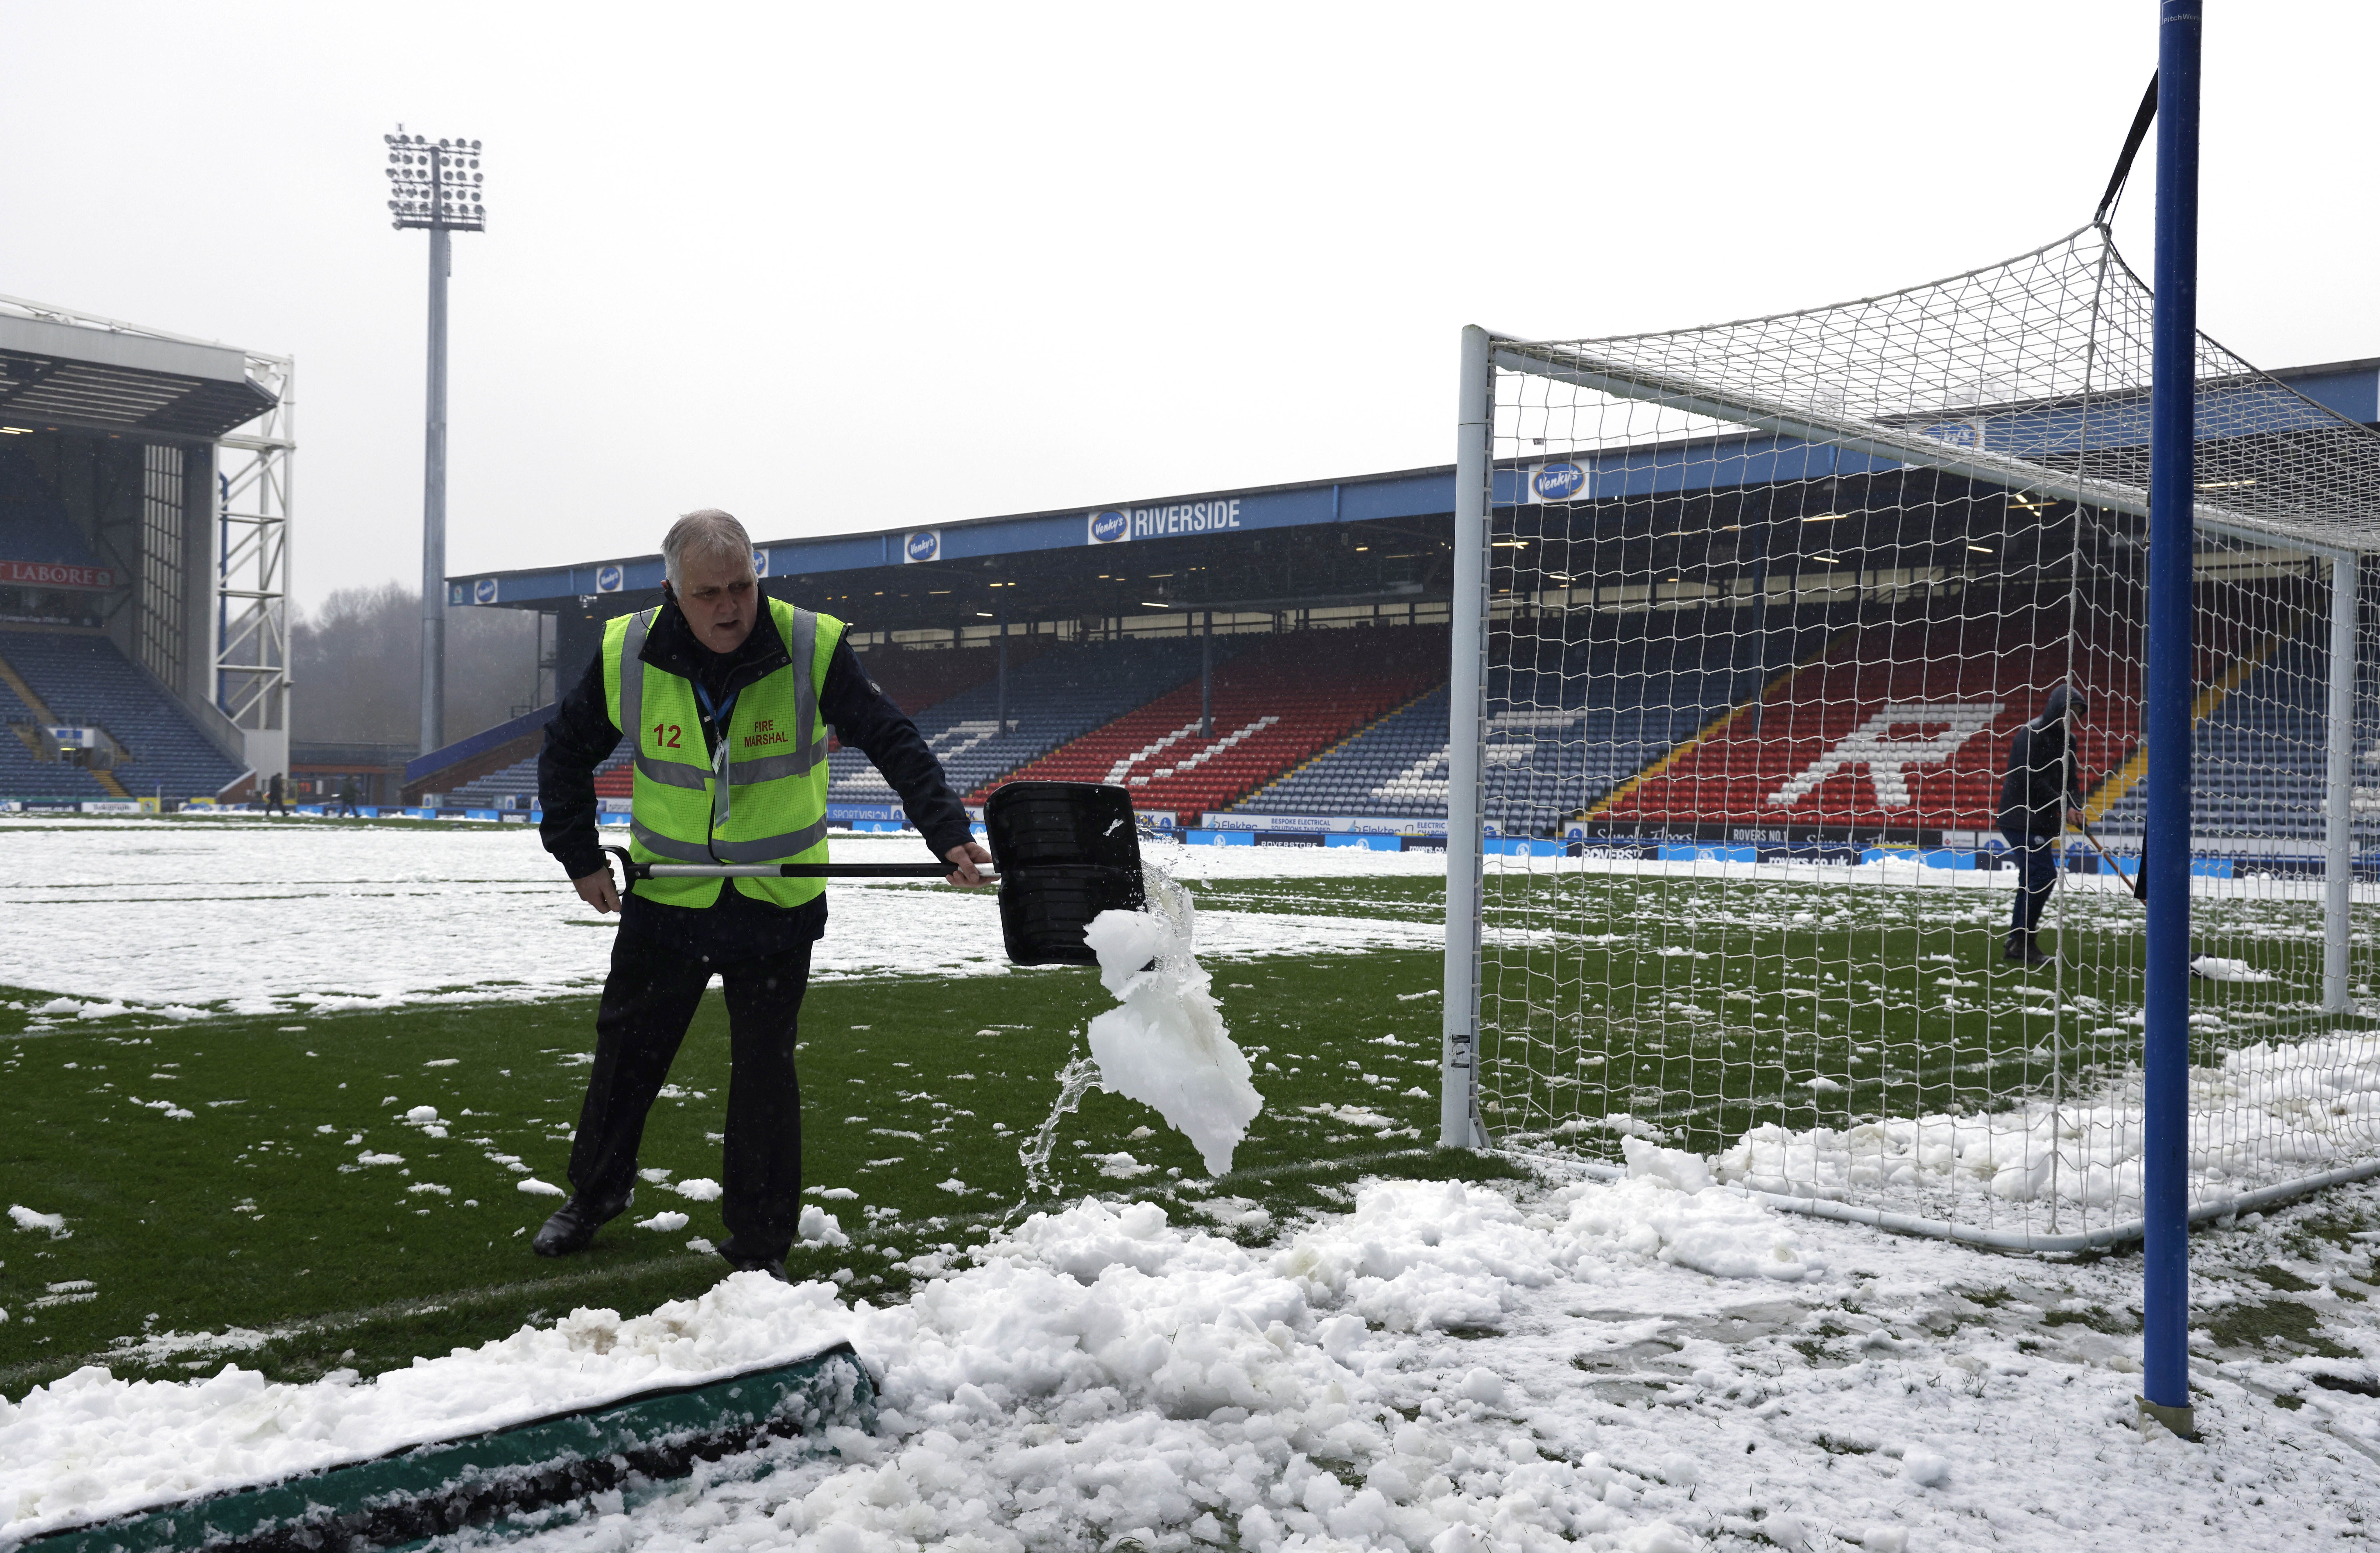 Staff clearing snow from the pitch before the Rovers game was cancelled